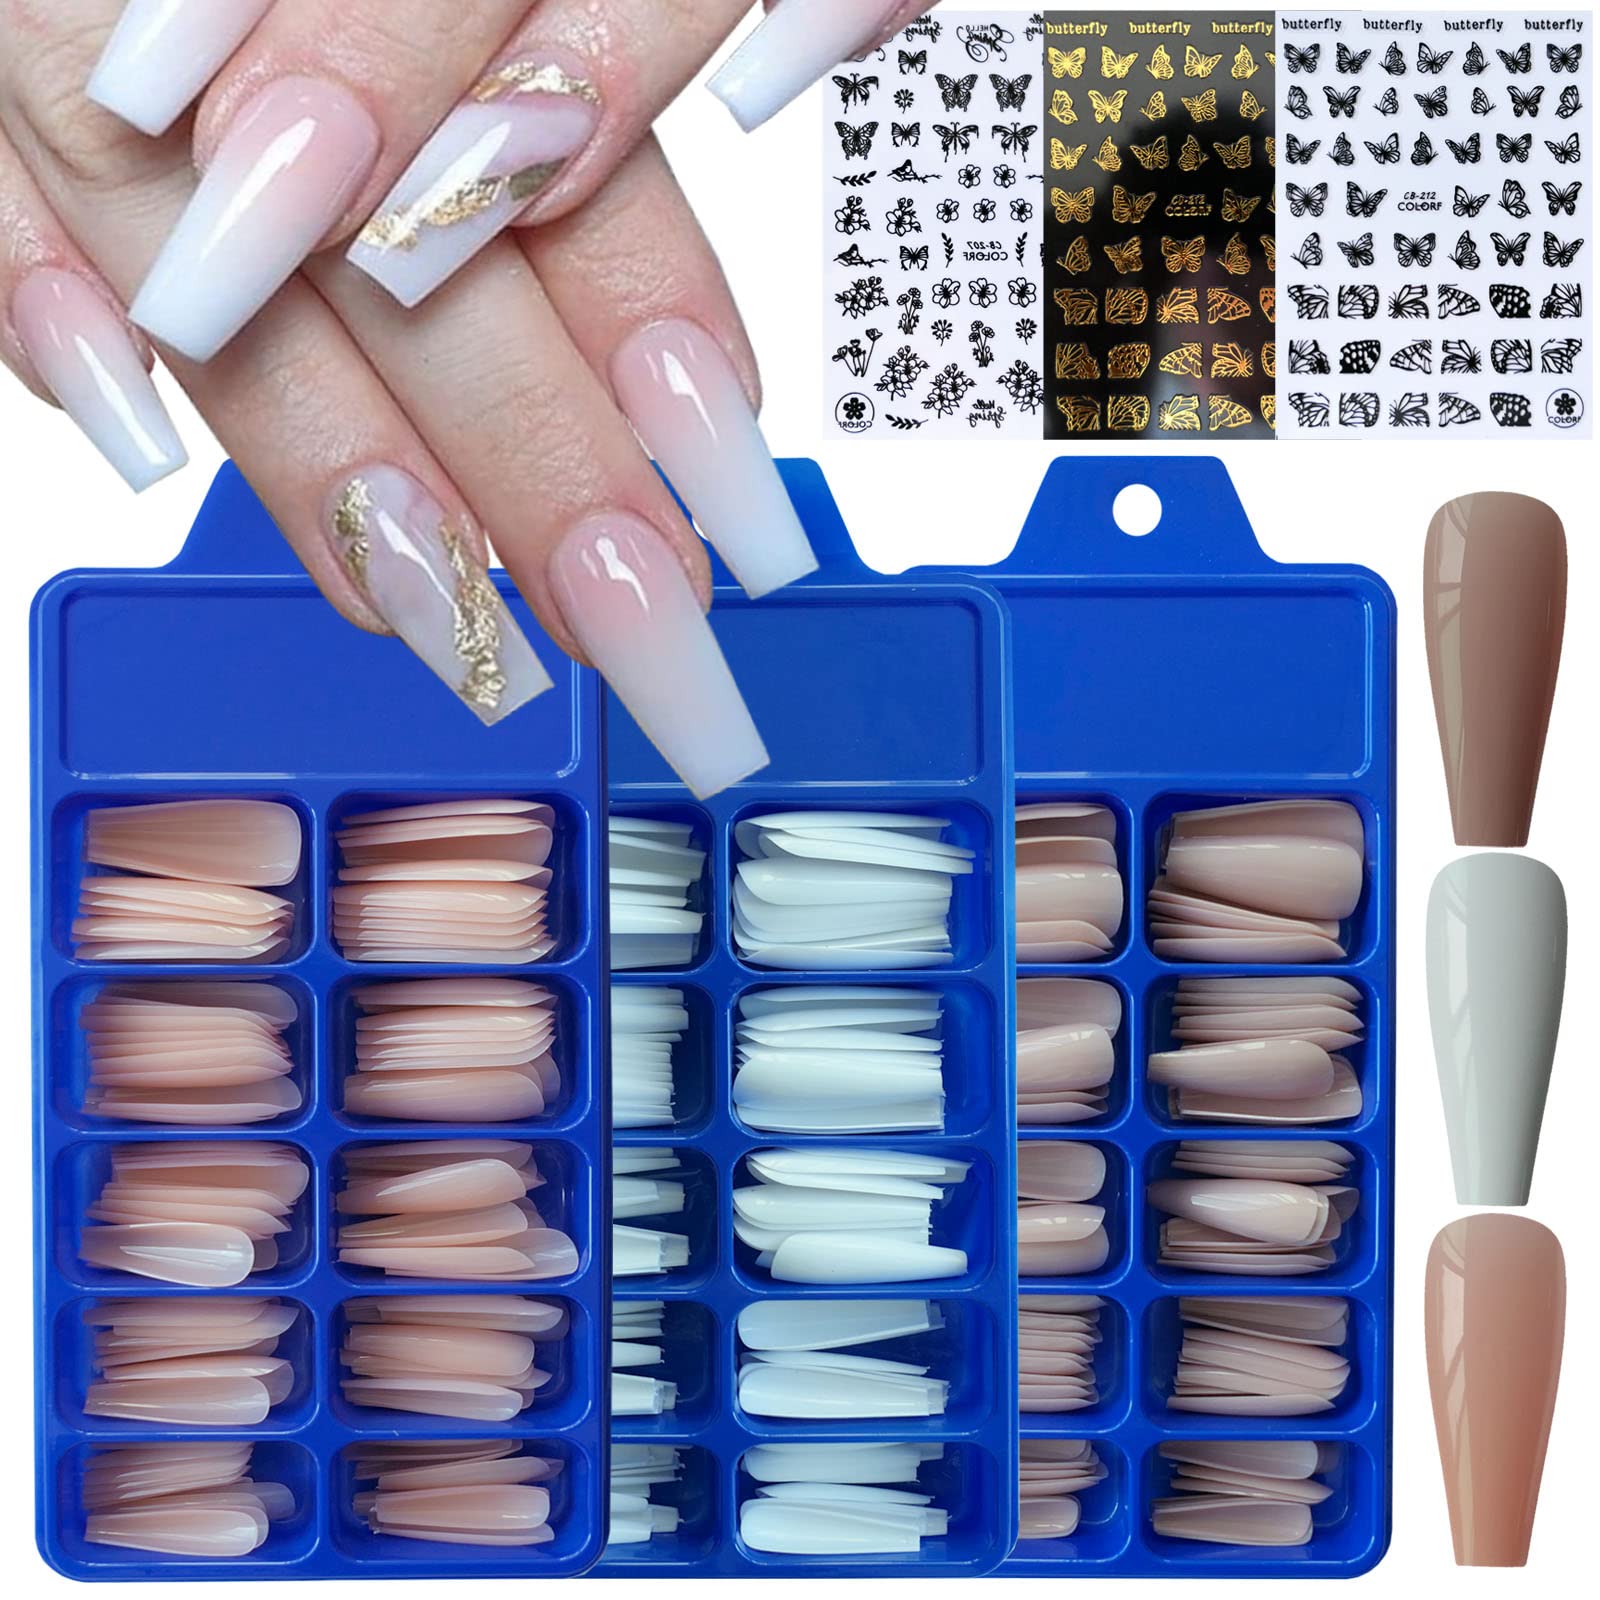 New! Nail Bundle for Nail Techs and Distributors - Rhinestones Unlimited